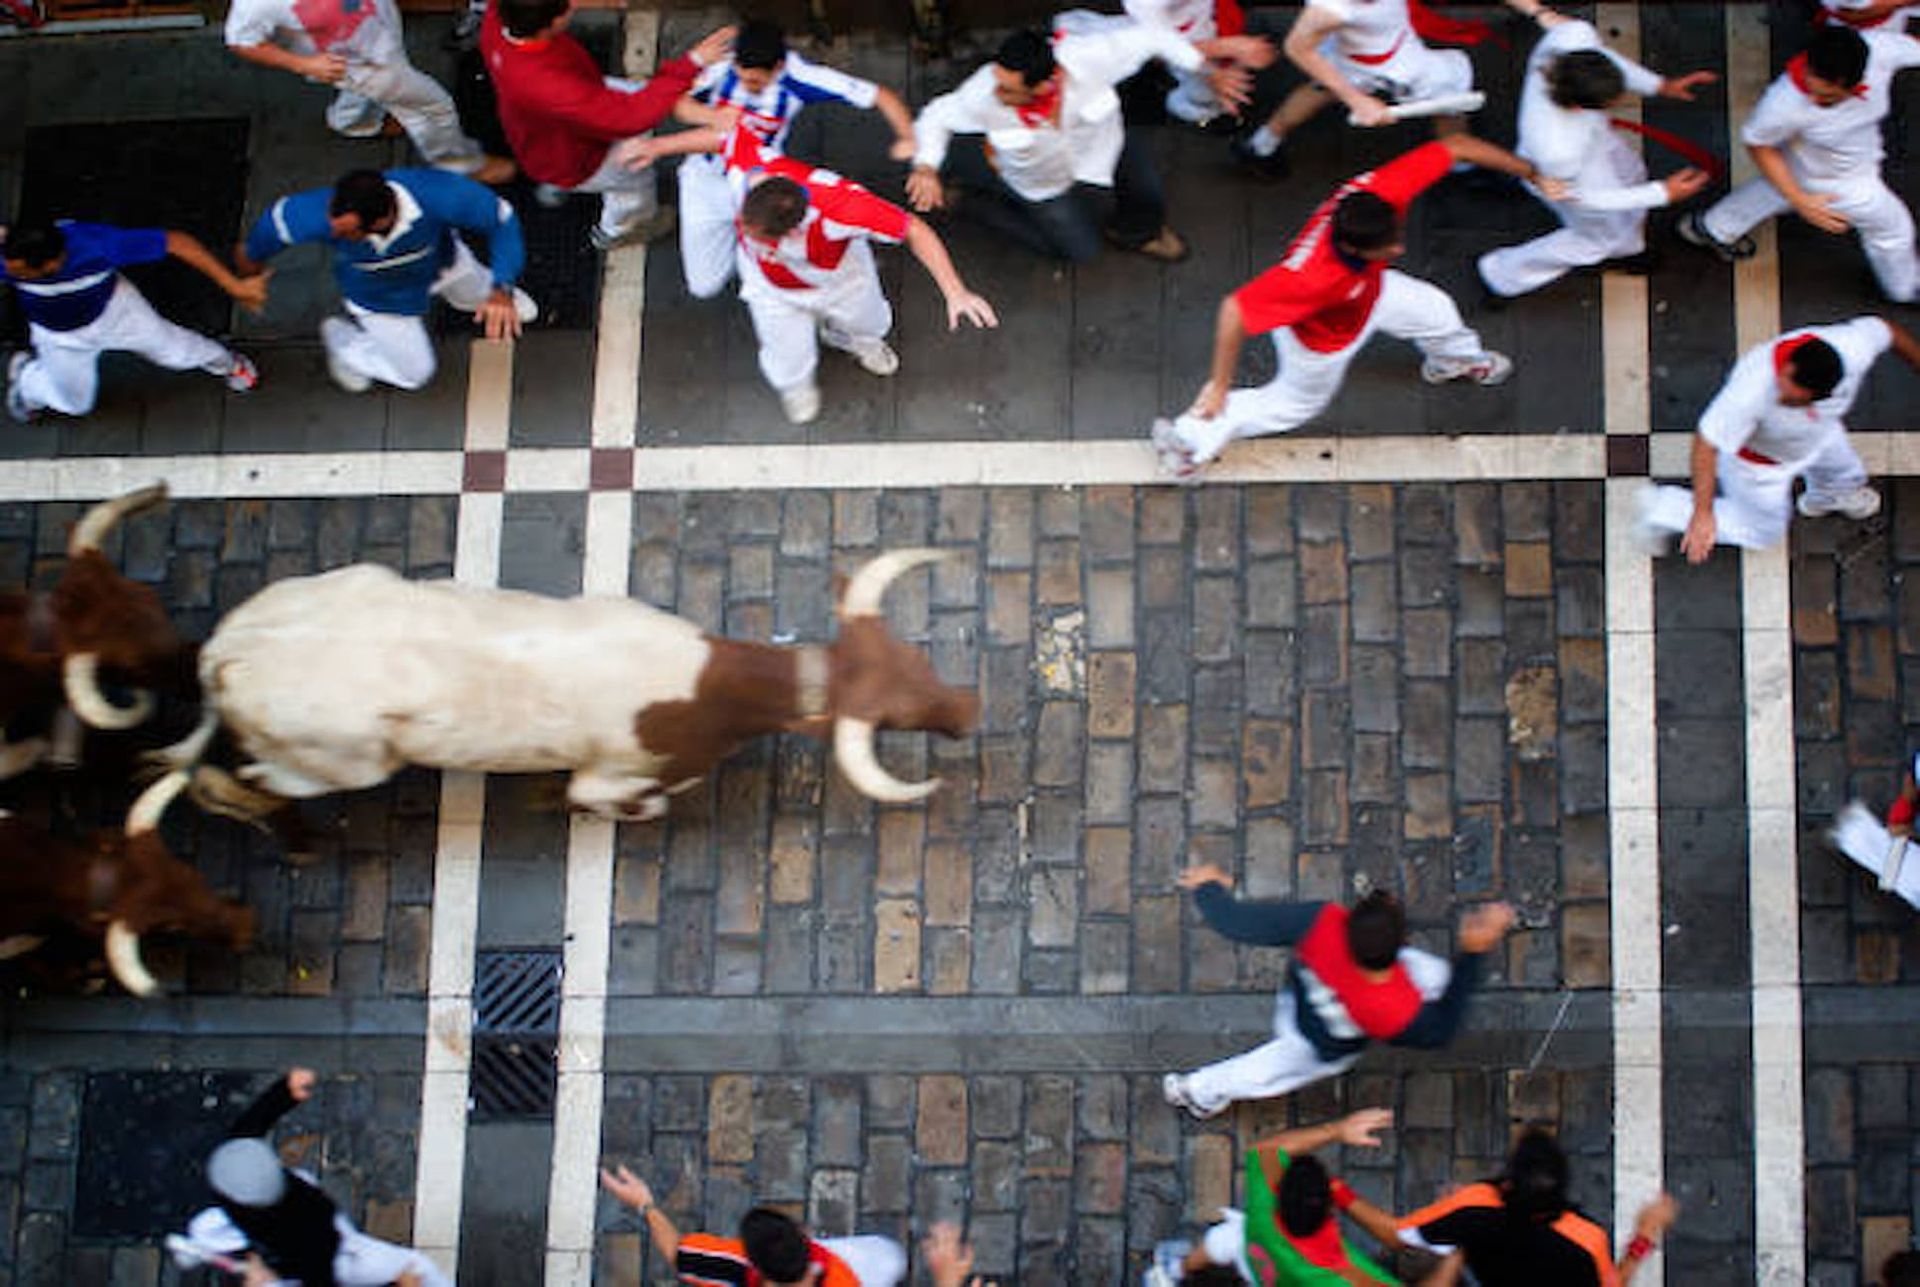 The experience of the Running of the Bulls in San Fermín